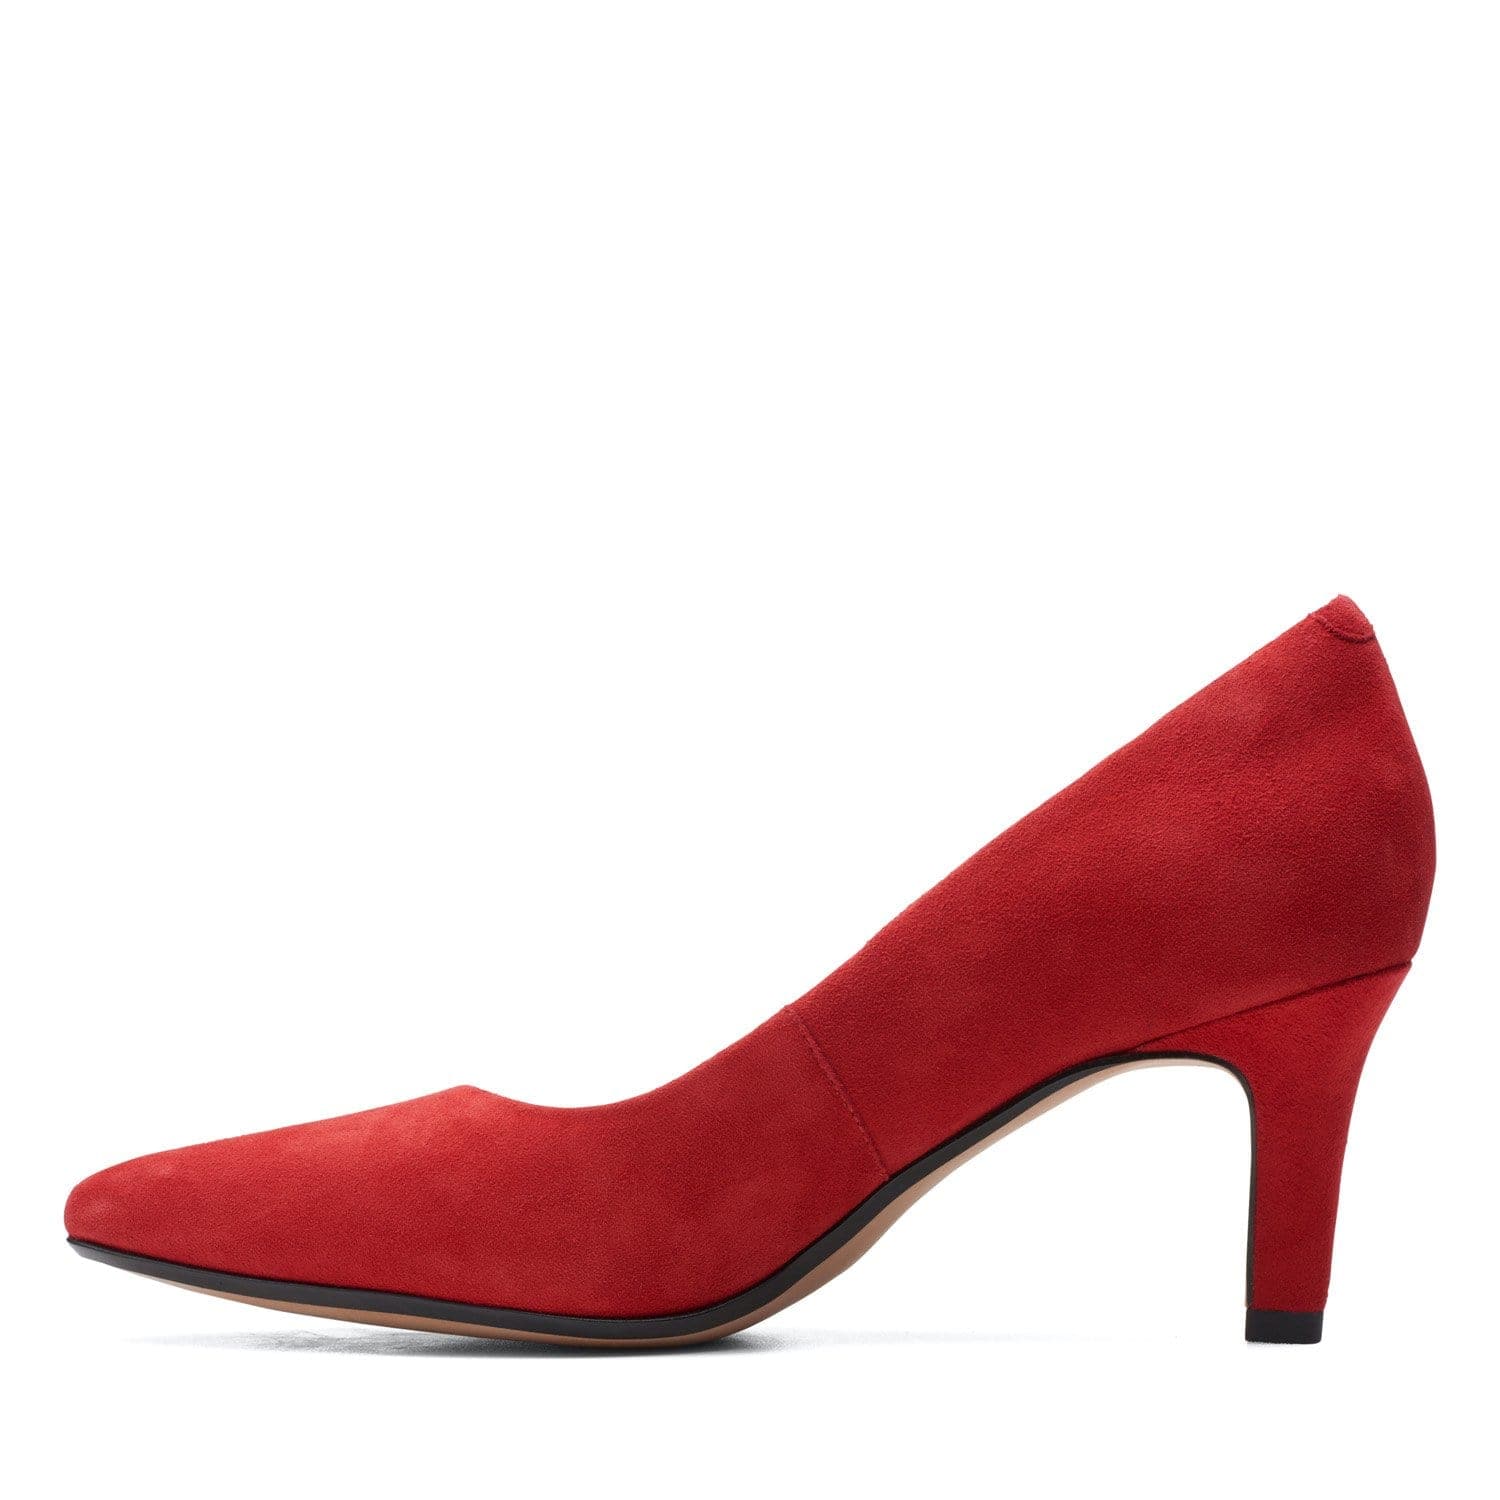 Clarks Illeana Tulip - Shoes - Red Suede - 261543495 - E Width (Wide Fit)